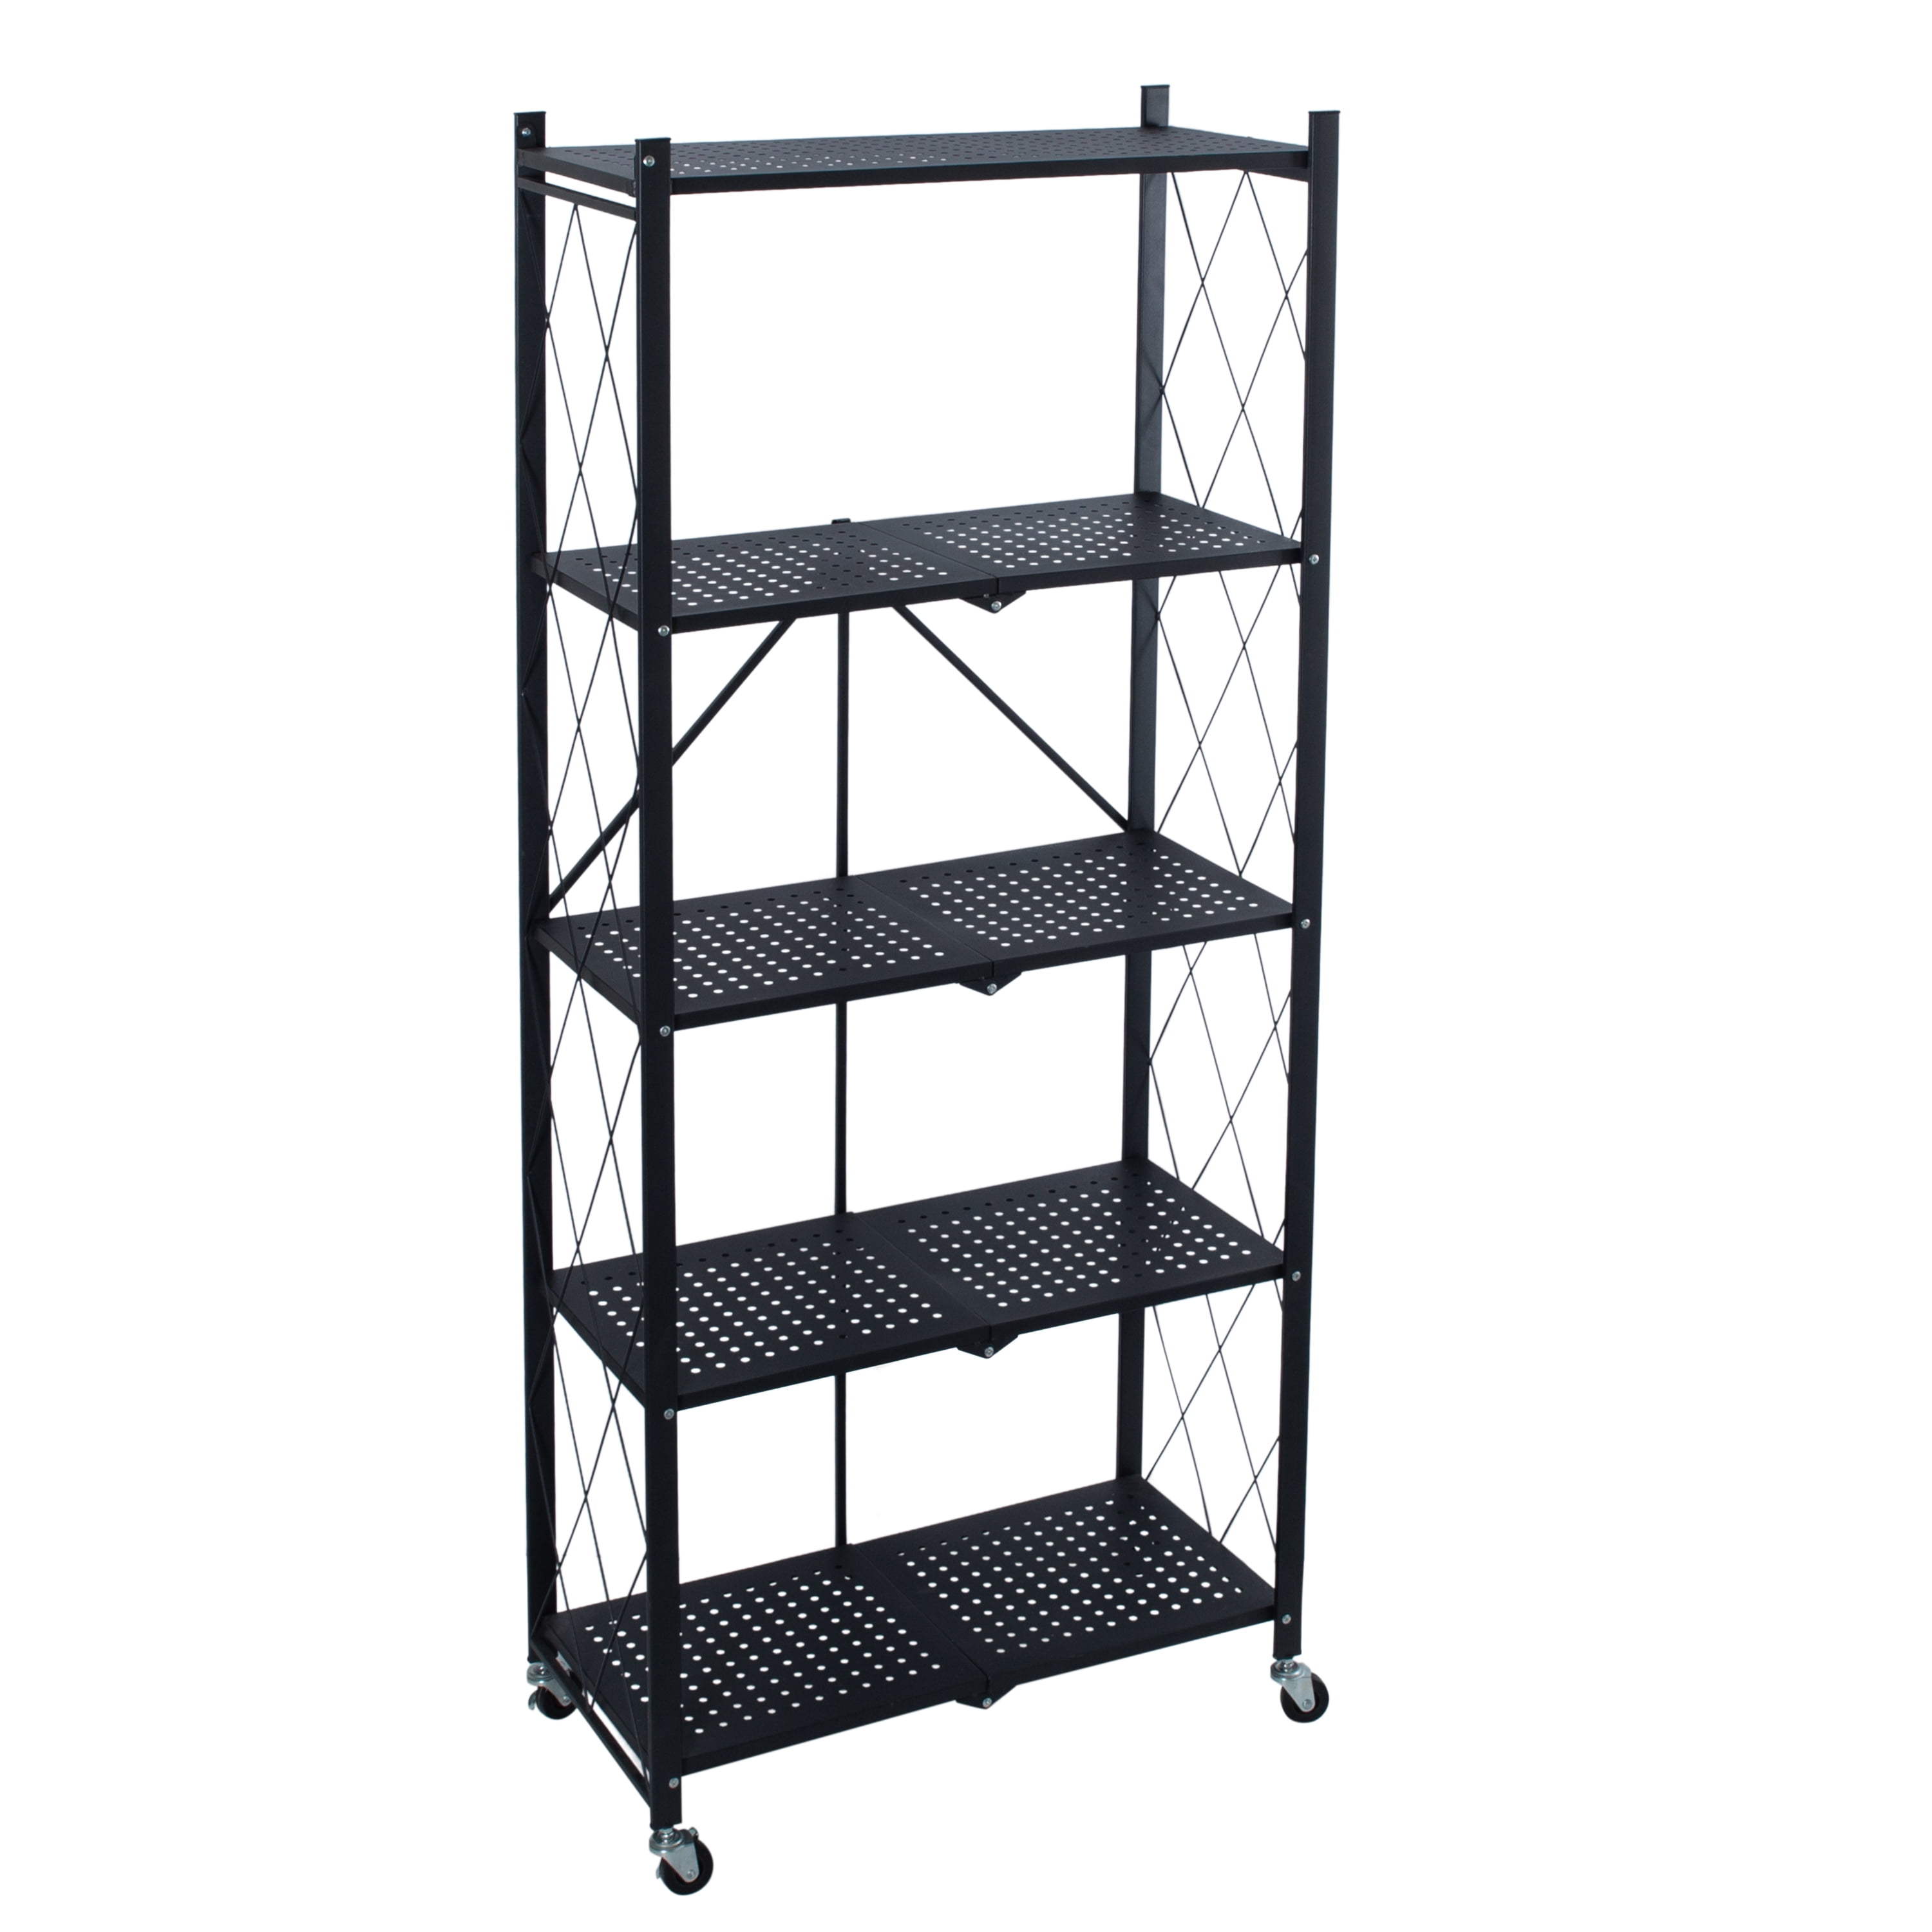 VEVOR Storage Shelf, 4-Tier Storage Shelving Unit, Stainless Steel Garage  Shelf, 59.1 x 17.7 x 61 inch Heavy Duty Storage Shelving, 529 Lbs Total  Capacity with Adjustable Height and Vent Holes